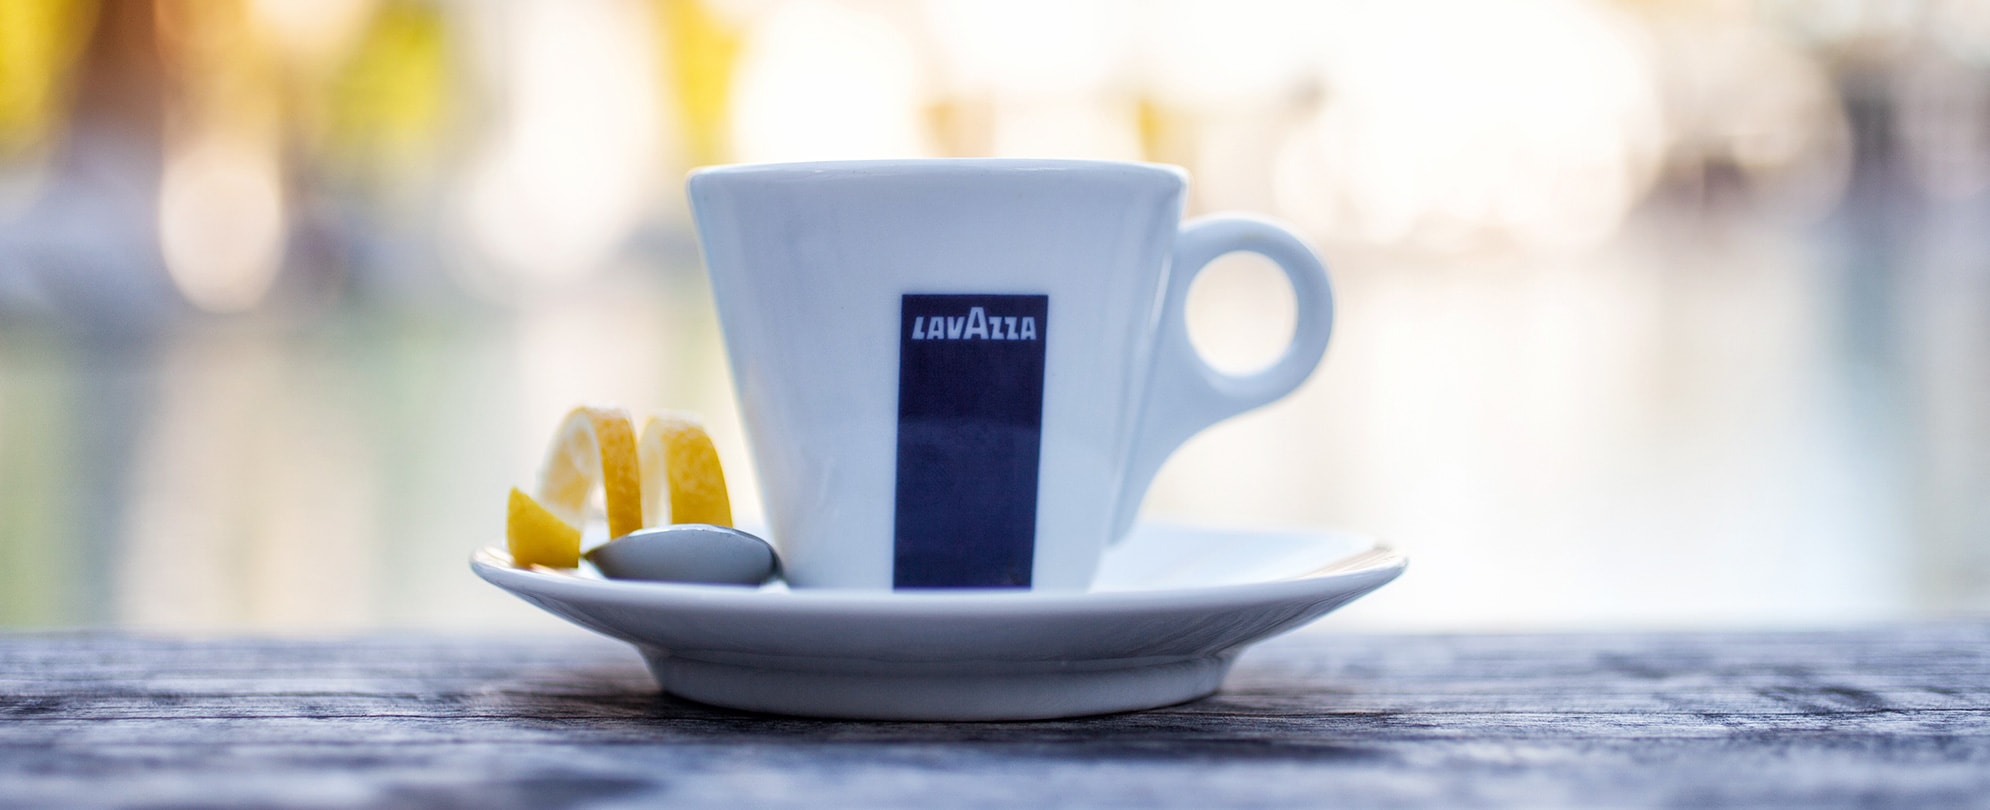 A Lavazza espresso cup and saucer with a lemon peel on the side. 